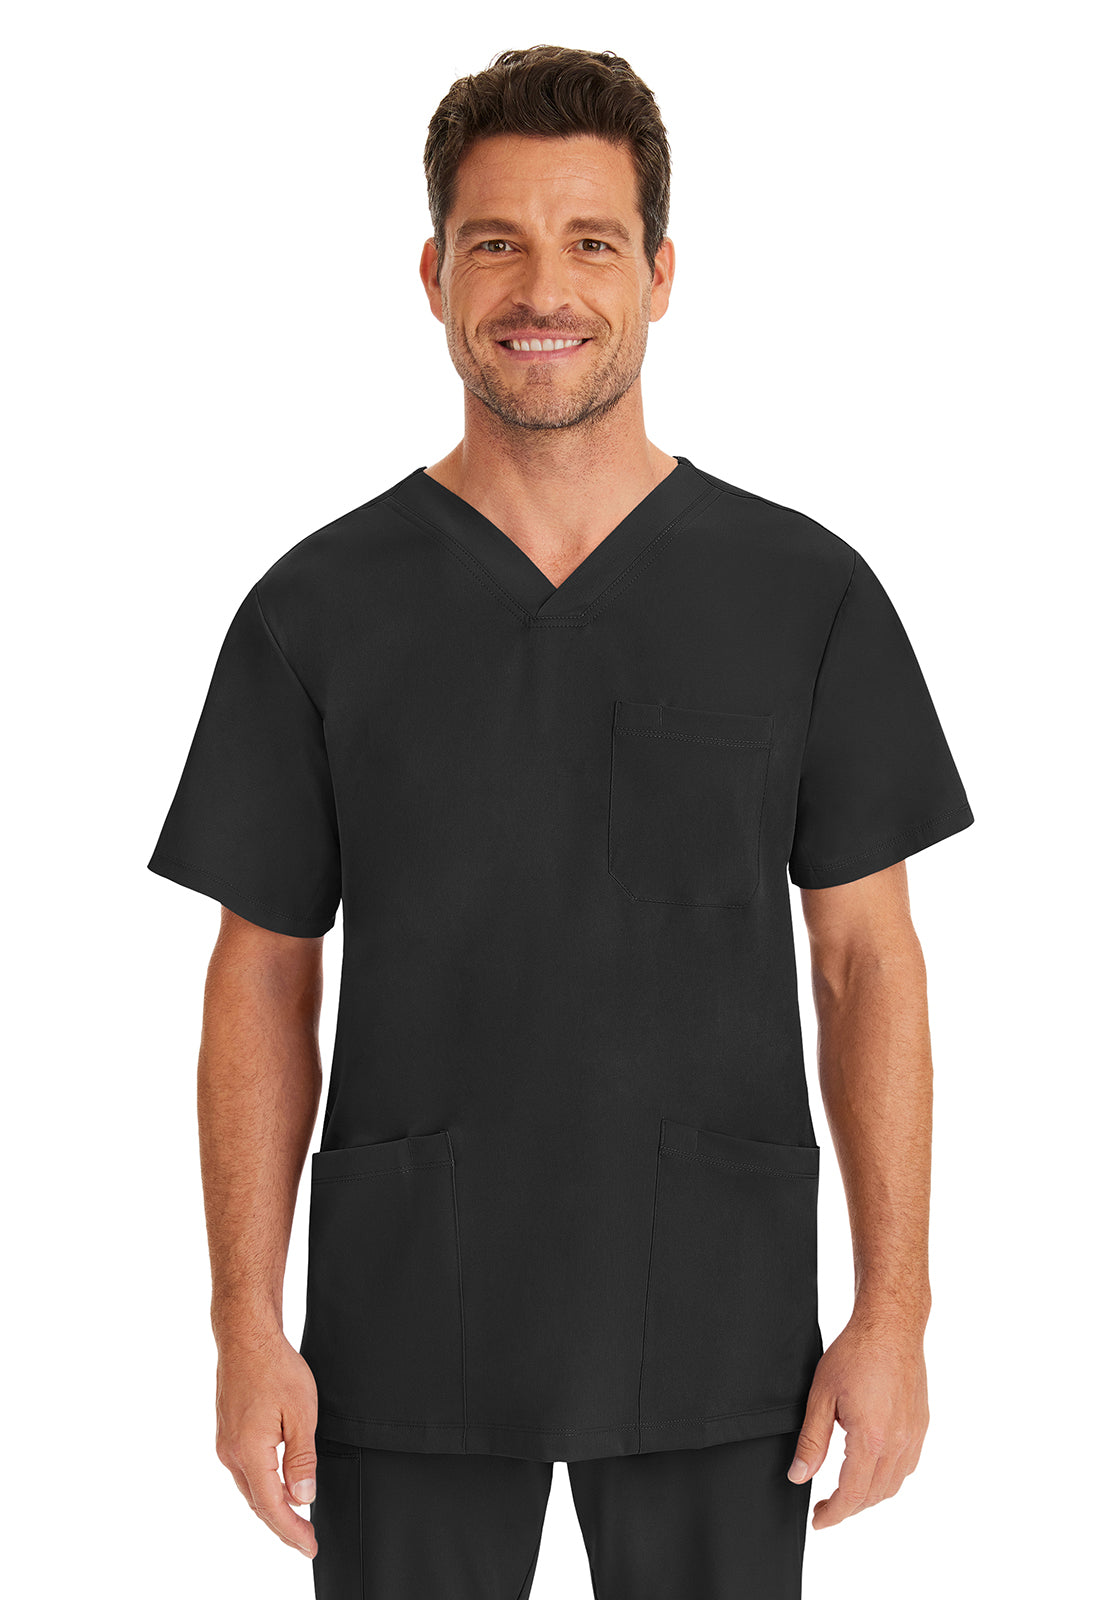  healing hands Scrubs for Men Top Blue Label One Pocket Men's  Scrub Top Lightweight Fabric 2223 James Royal S: Clothing, Shoes & Jewelry